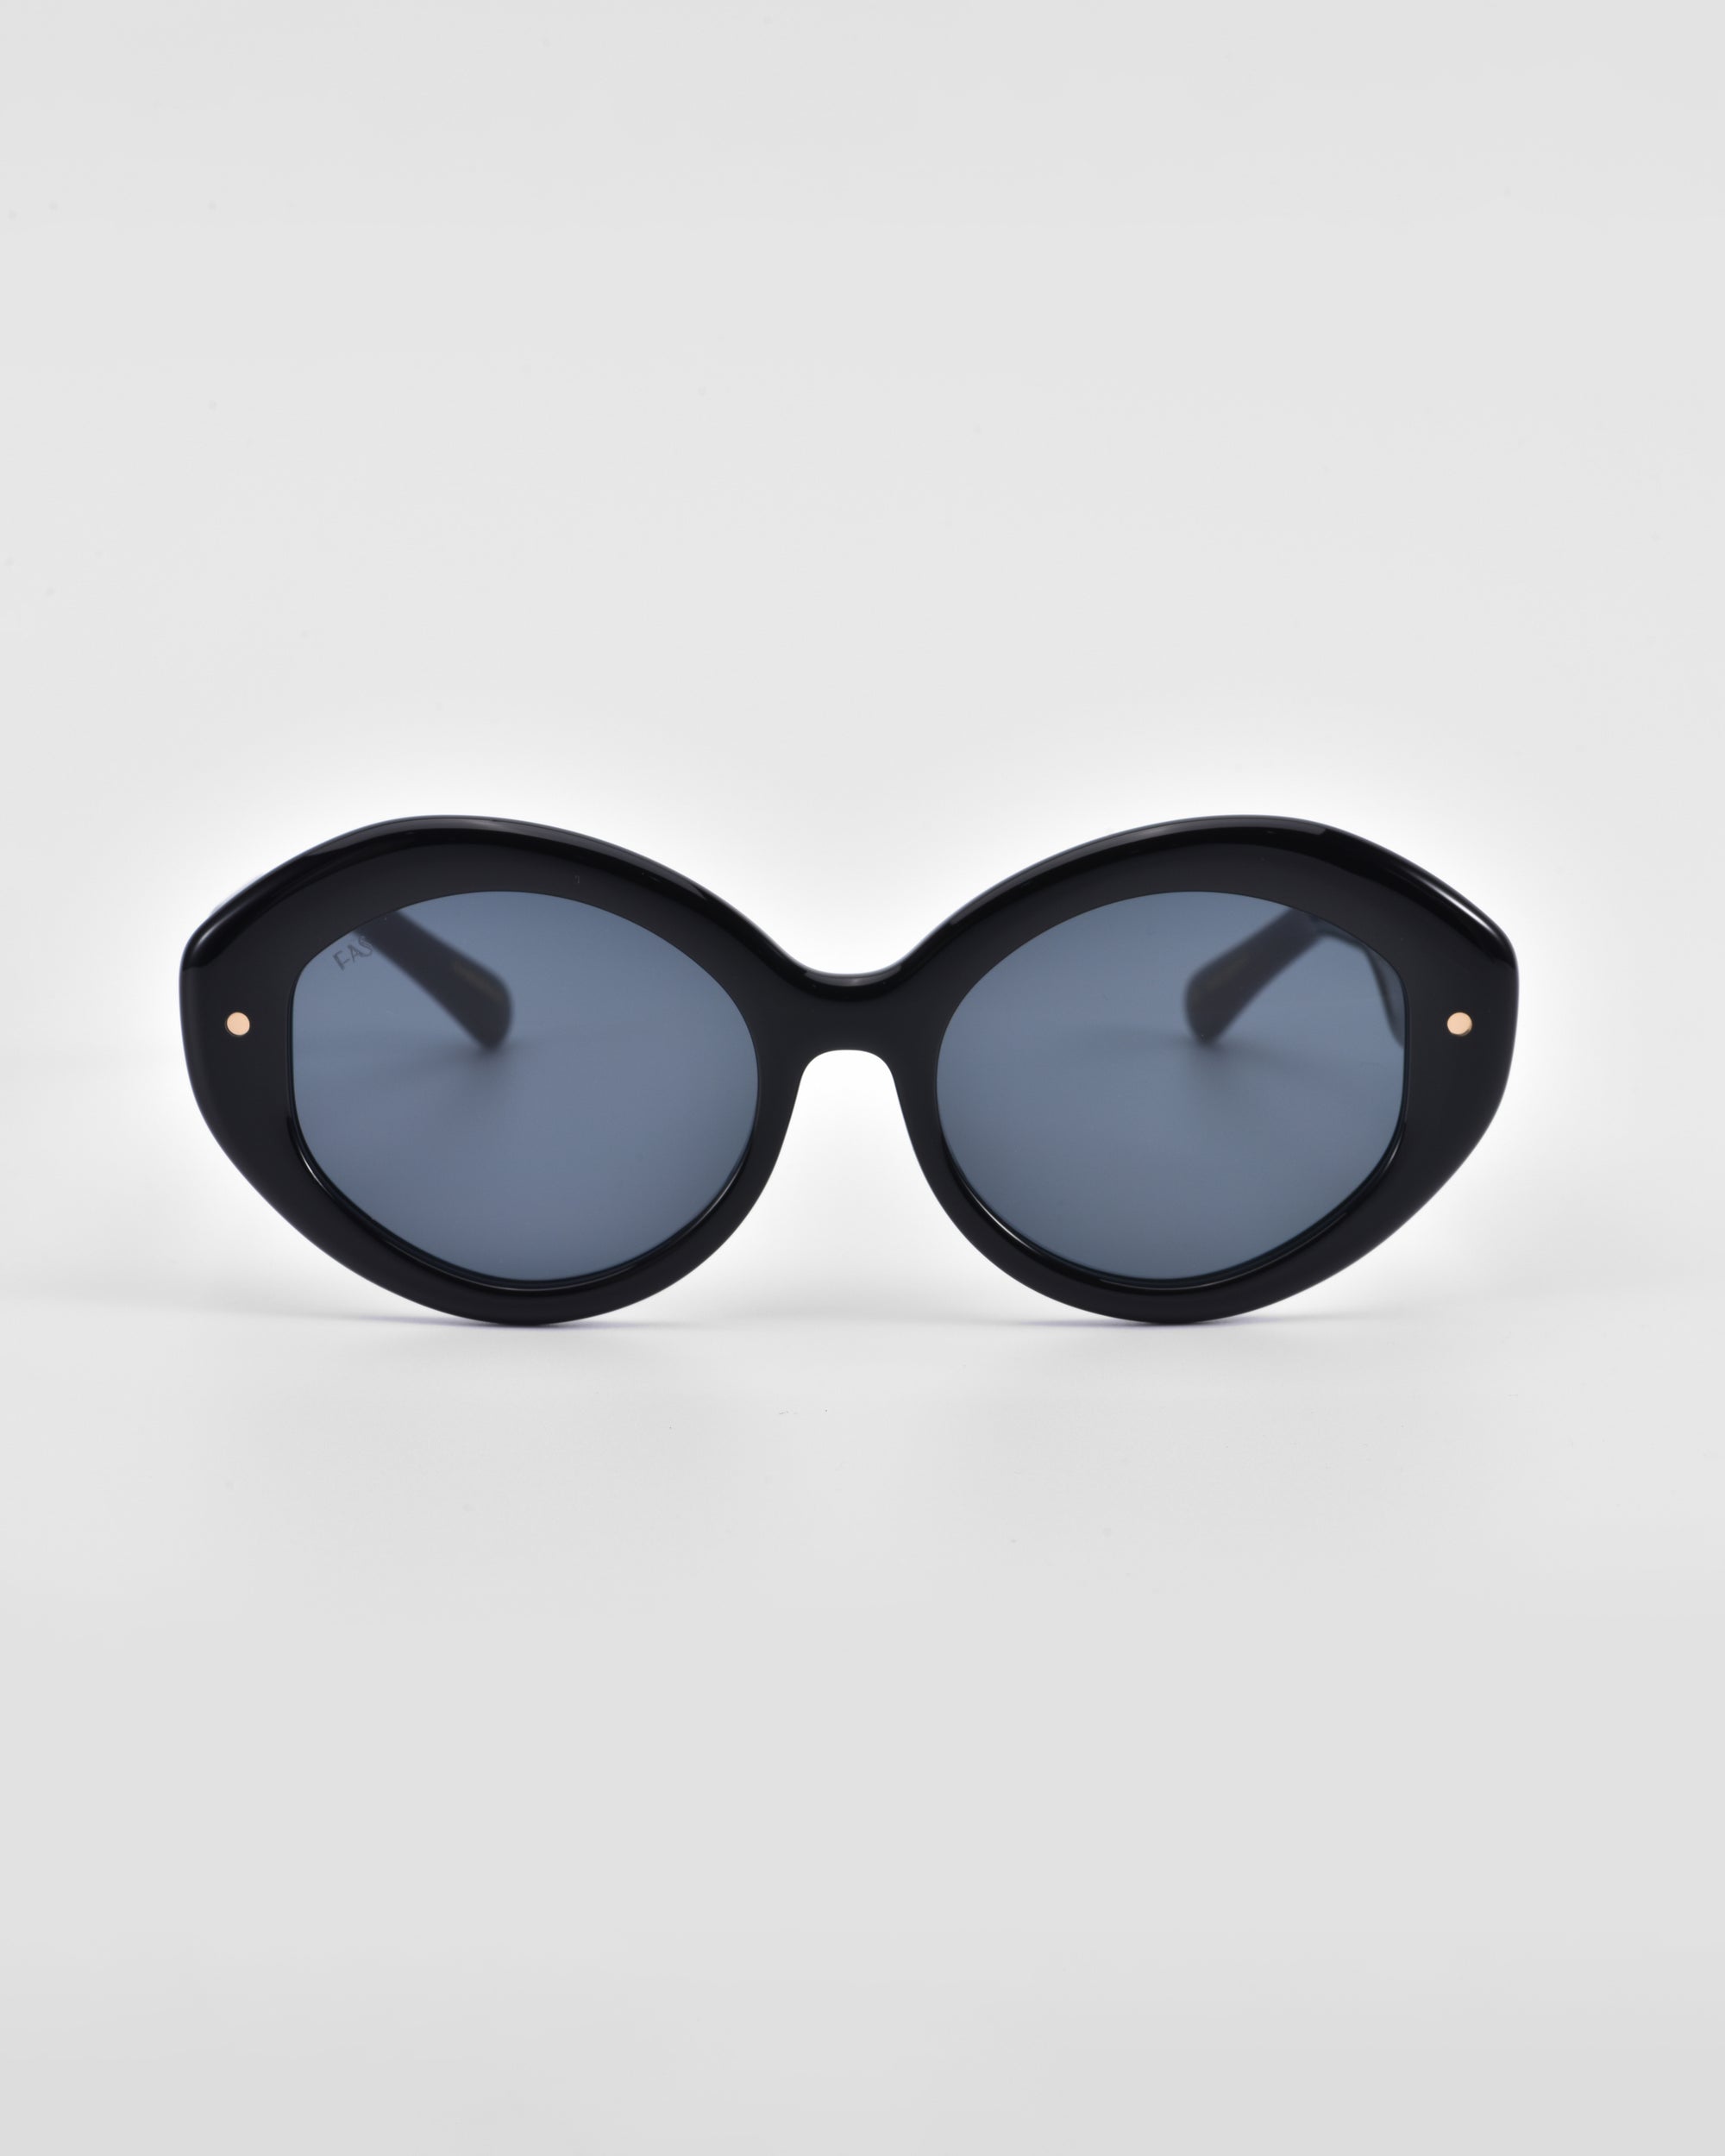 A pair of large, round, black Helios sunglasses with dark lenses by For Art's Sake®. The thick frame features two small metal accents near the hinges, adding a touch of sophistication. This piece of luxury eyewear is set against a plain light gray background.